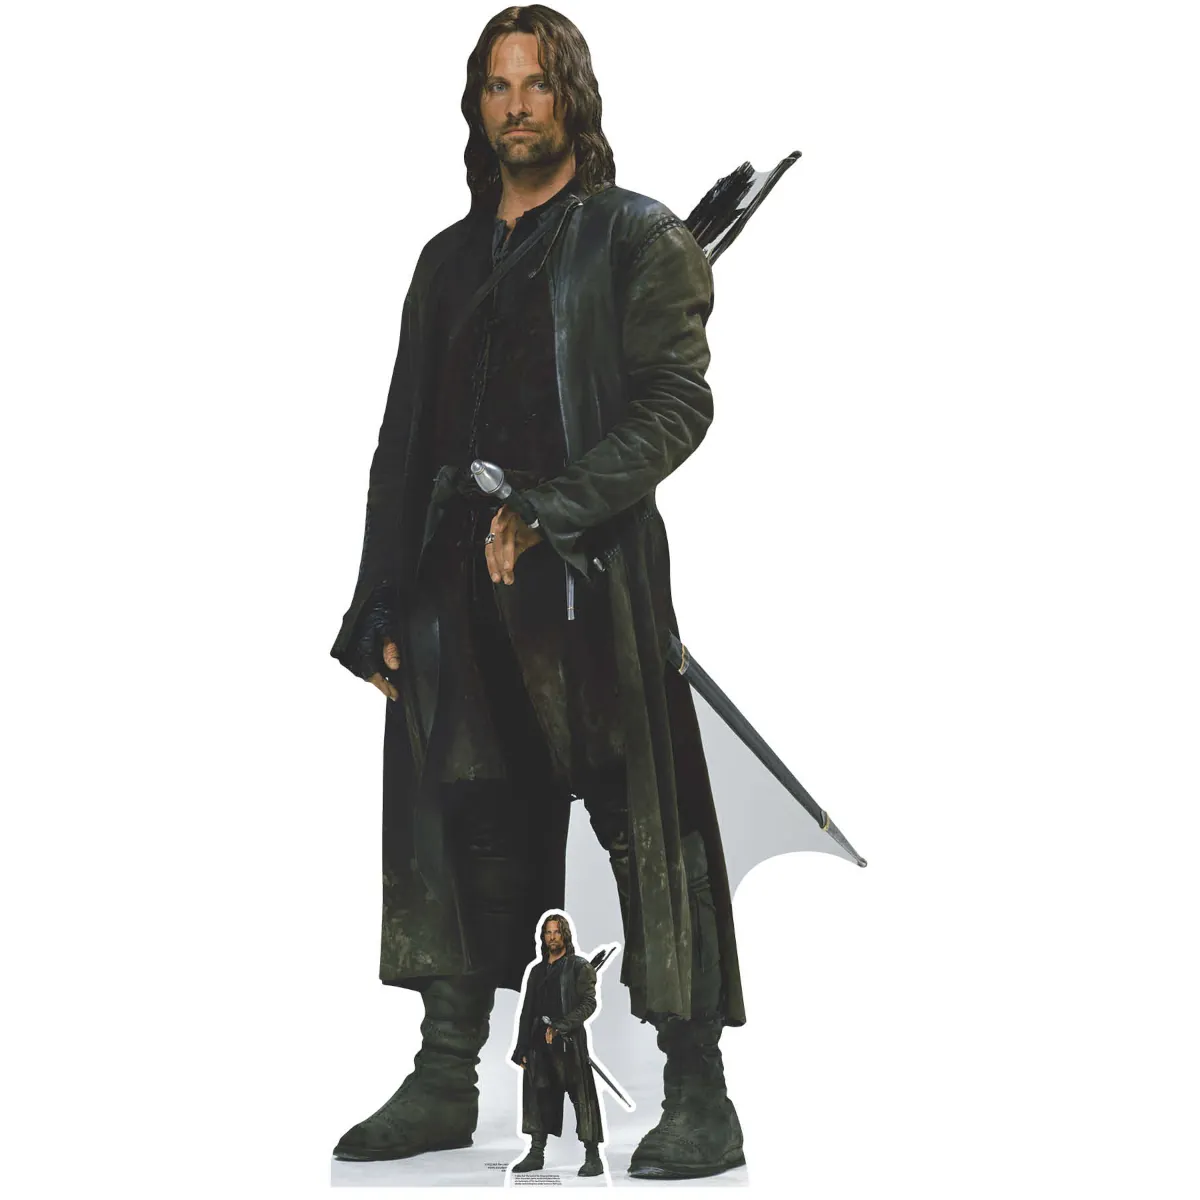 SC4130 Aragorn (The Lord of the Rings) Official Lifesize + Mini Cardboard Cutout Standee Front